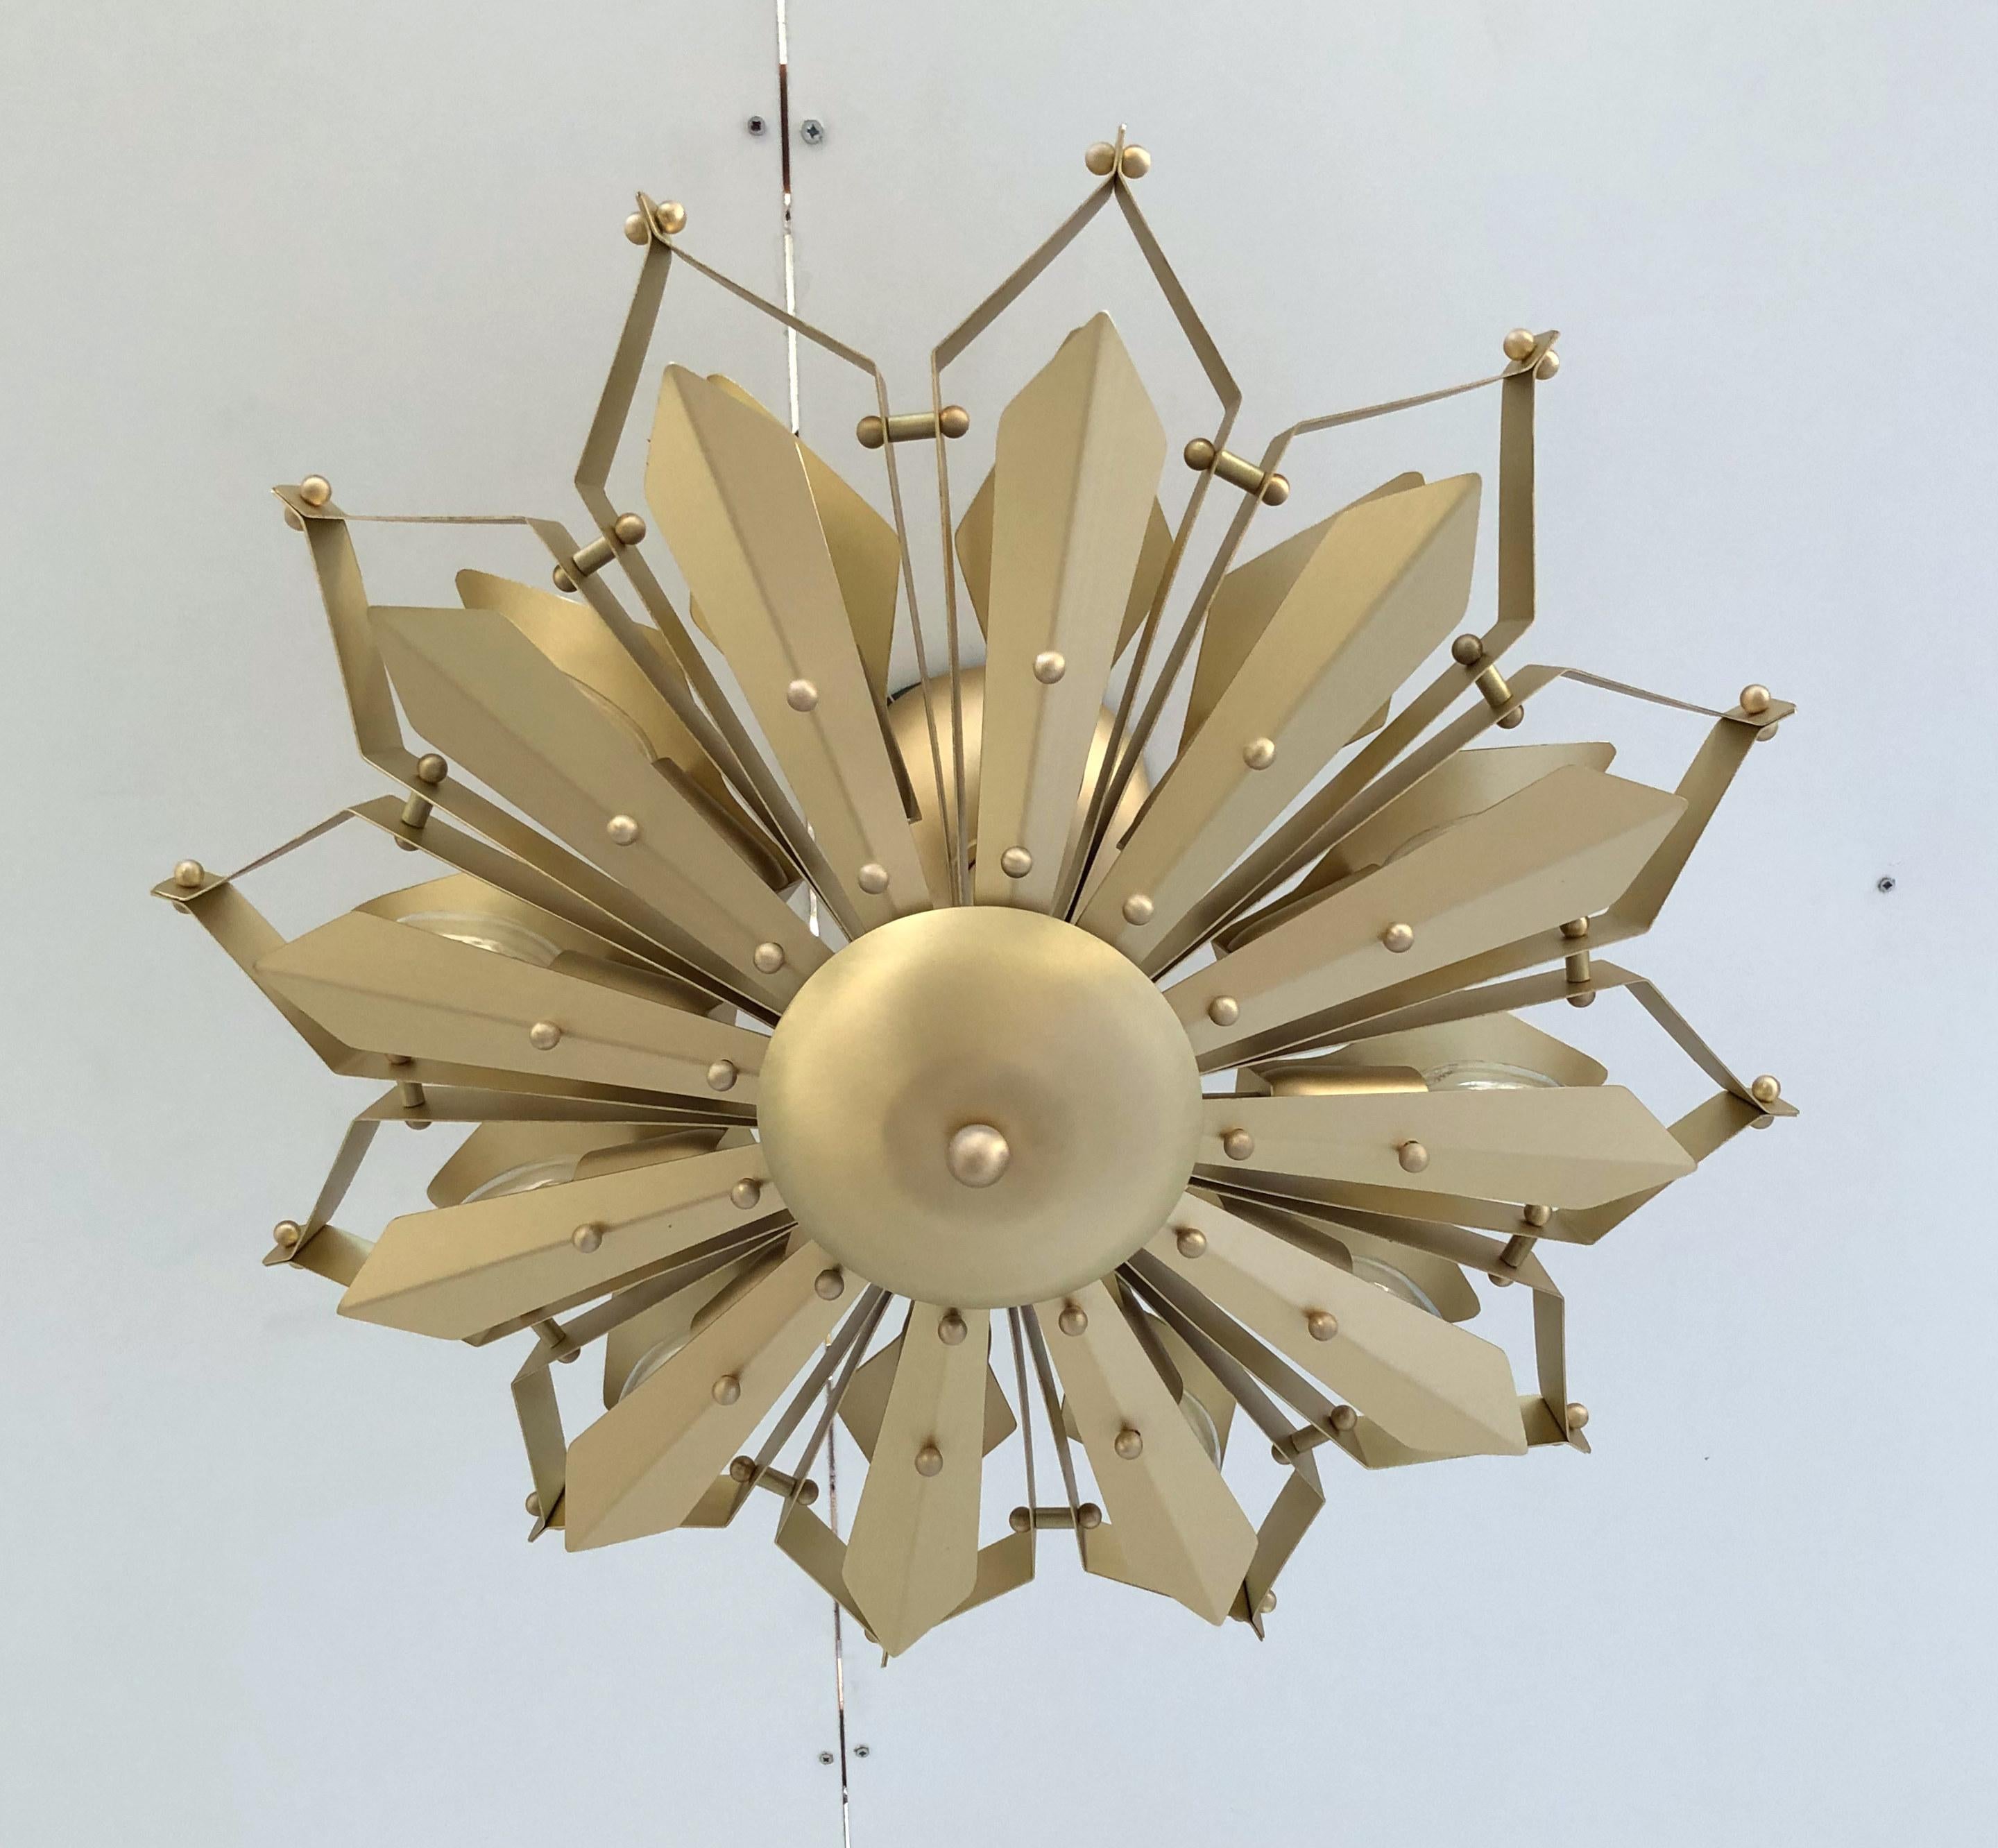 Elegant Italian flushmount with satin brass frame handcrafted to resemble a convex dahlia flower, designed by Fabio Bergomi for Fabio Ltd / made in Italy
12 lights / E12 or E14 type / max 40W each
Measures: diameter 24 inches / height 14